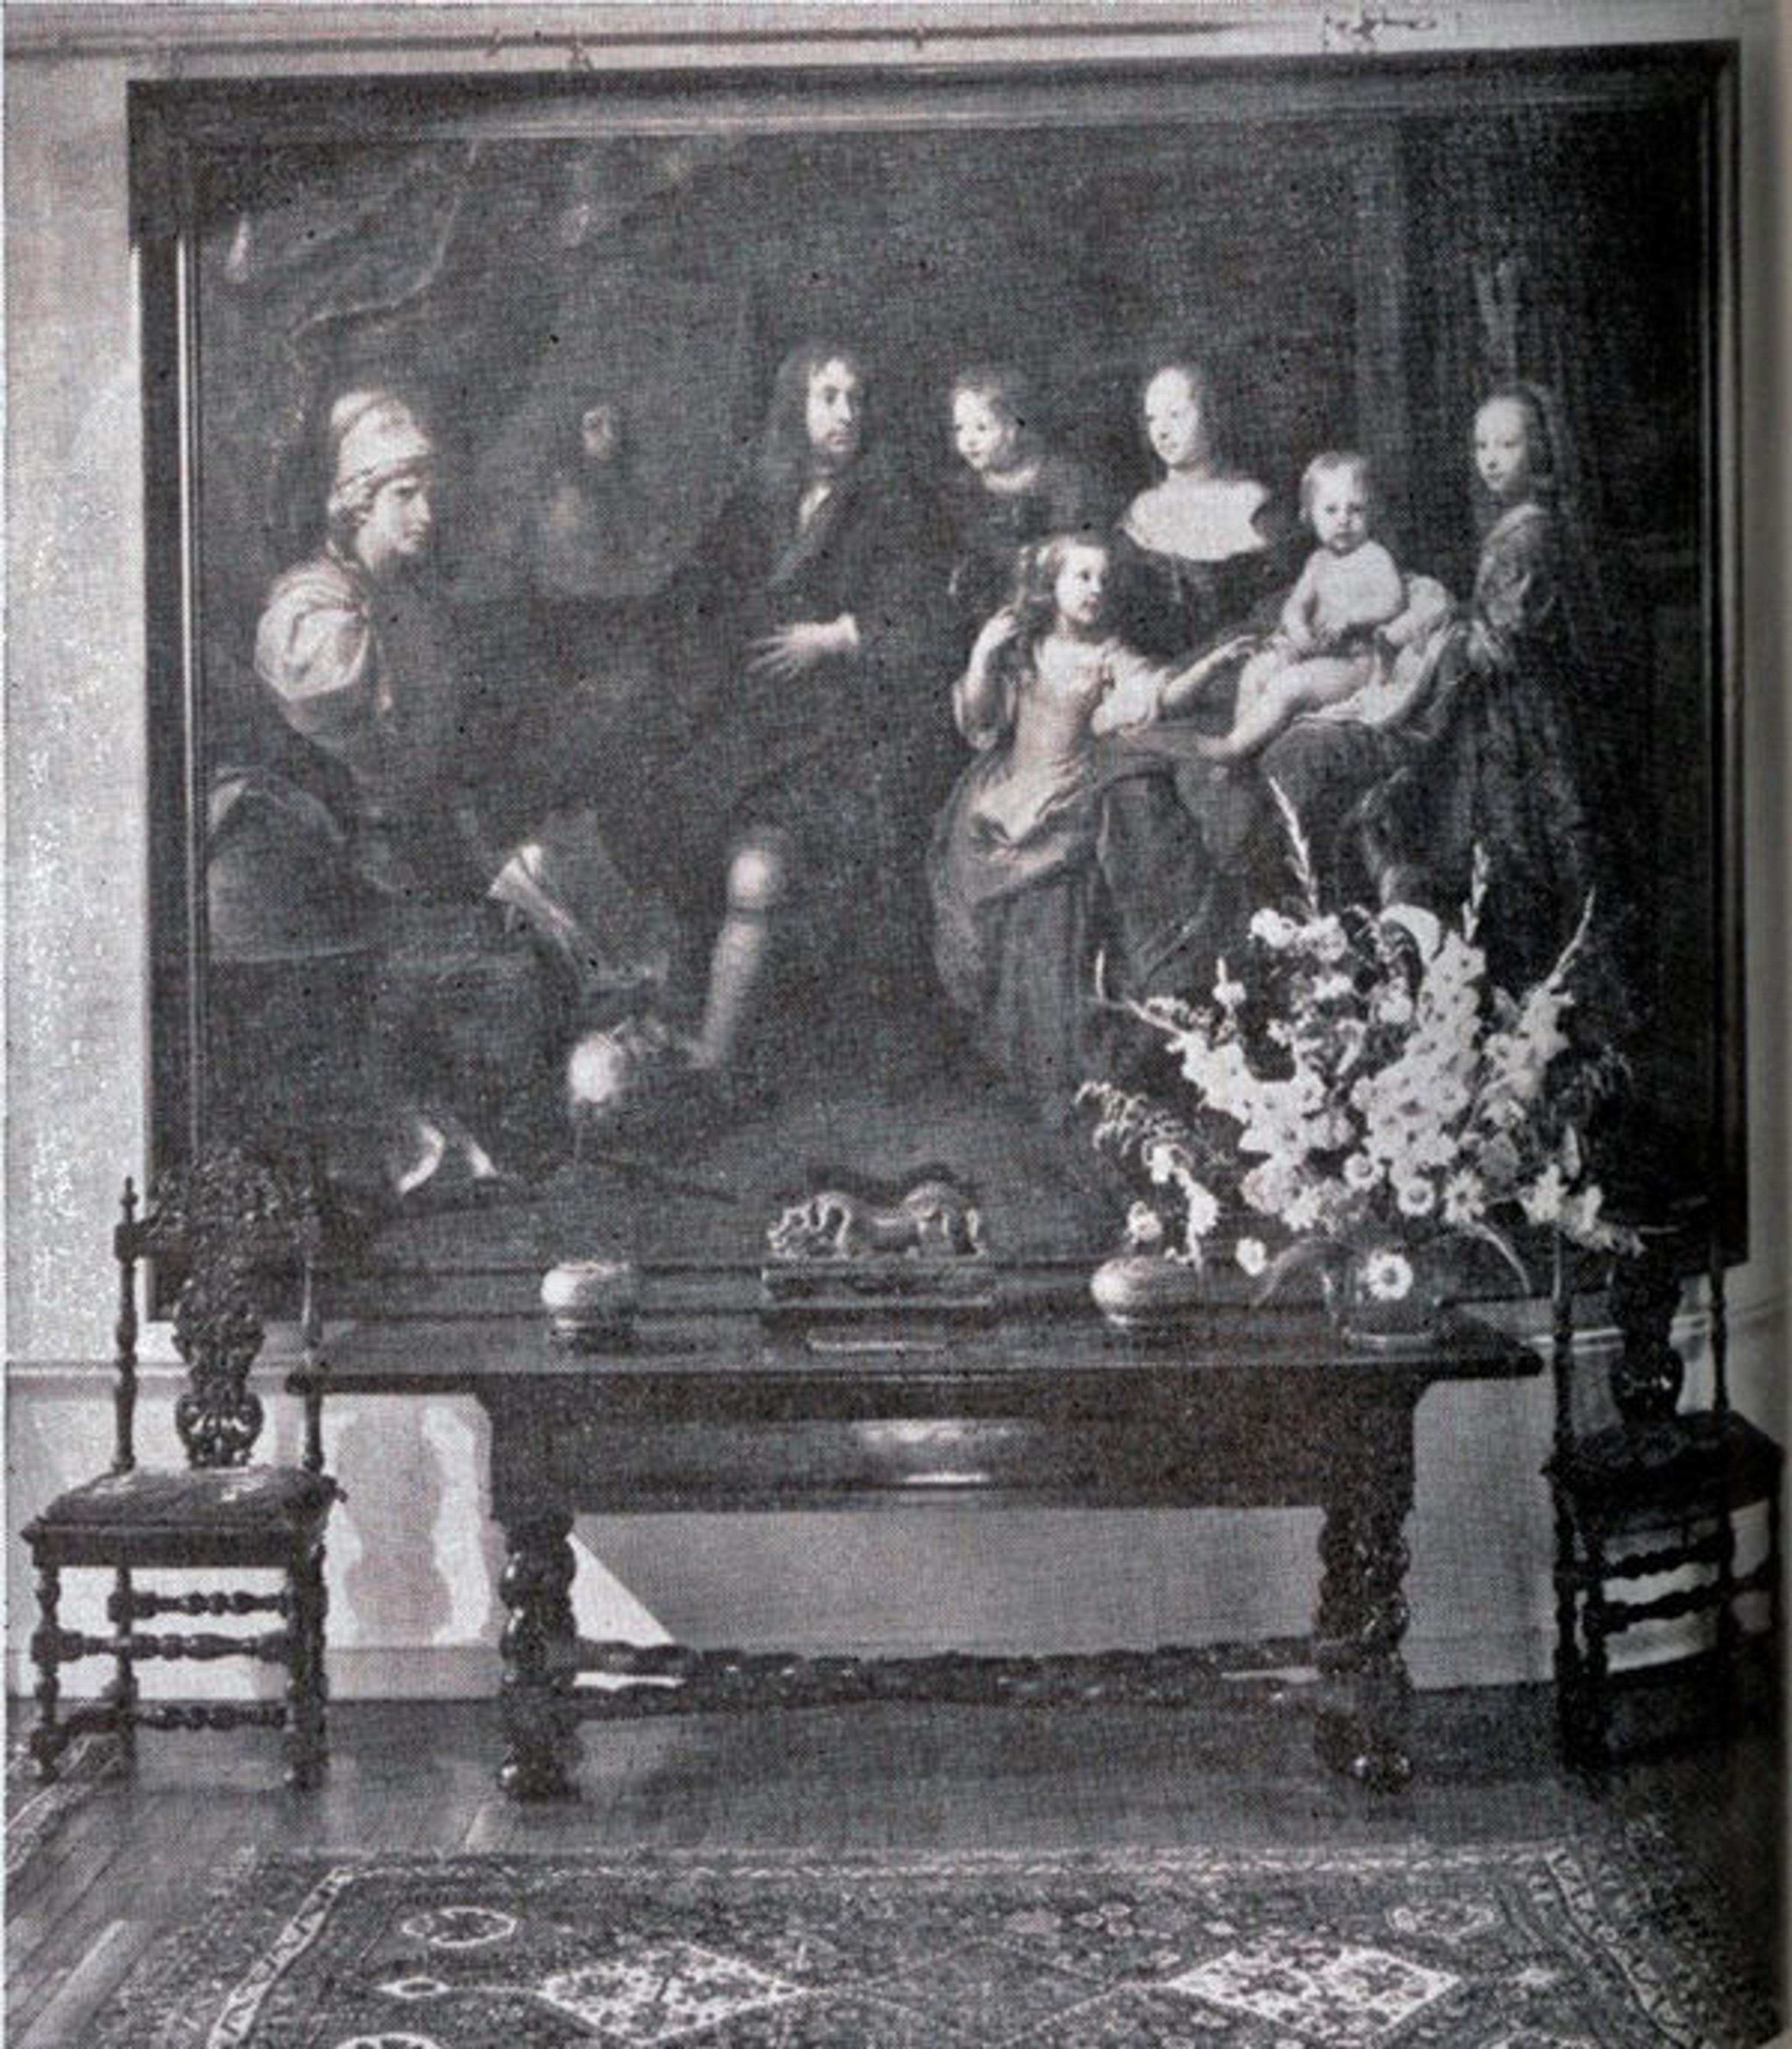 Charles Le Brun (French, 1619–1690) | Everhard Jabach (1618–1695) and His Family | 2014.250; installed at Olantigh House